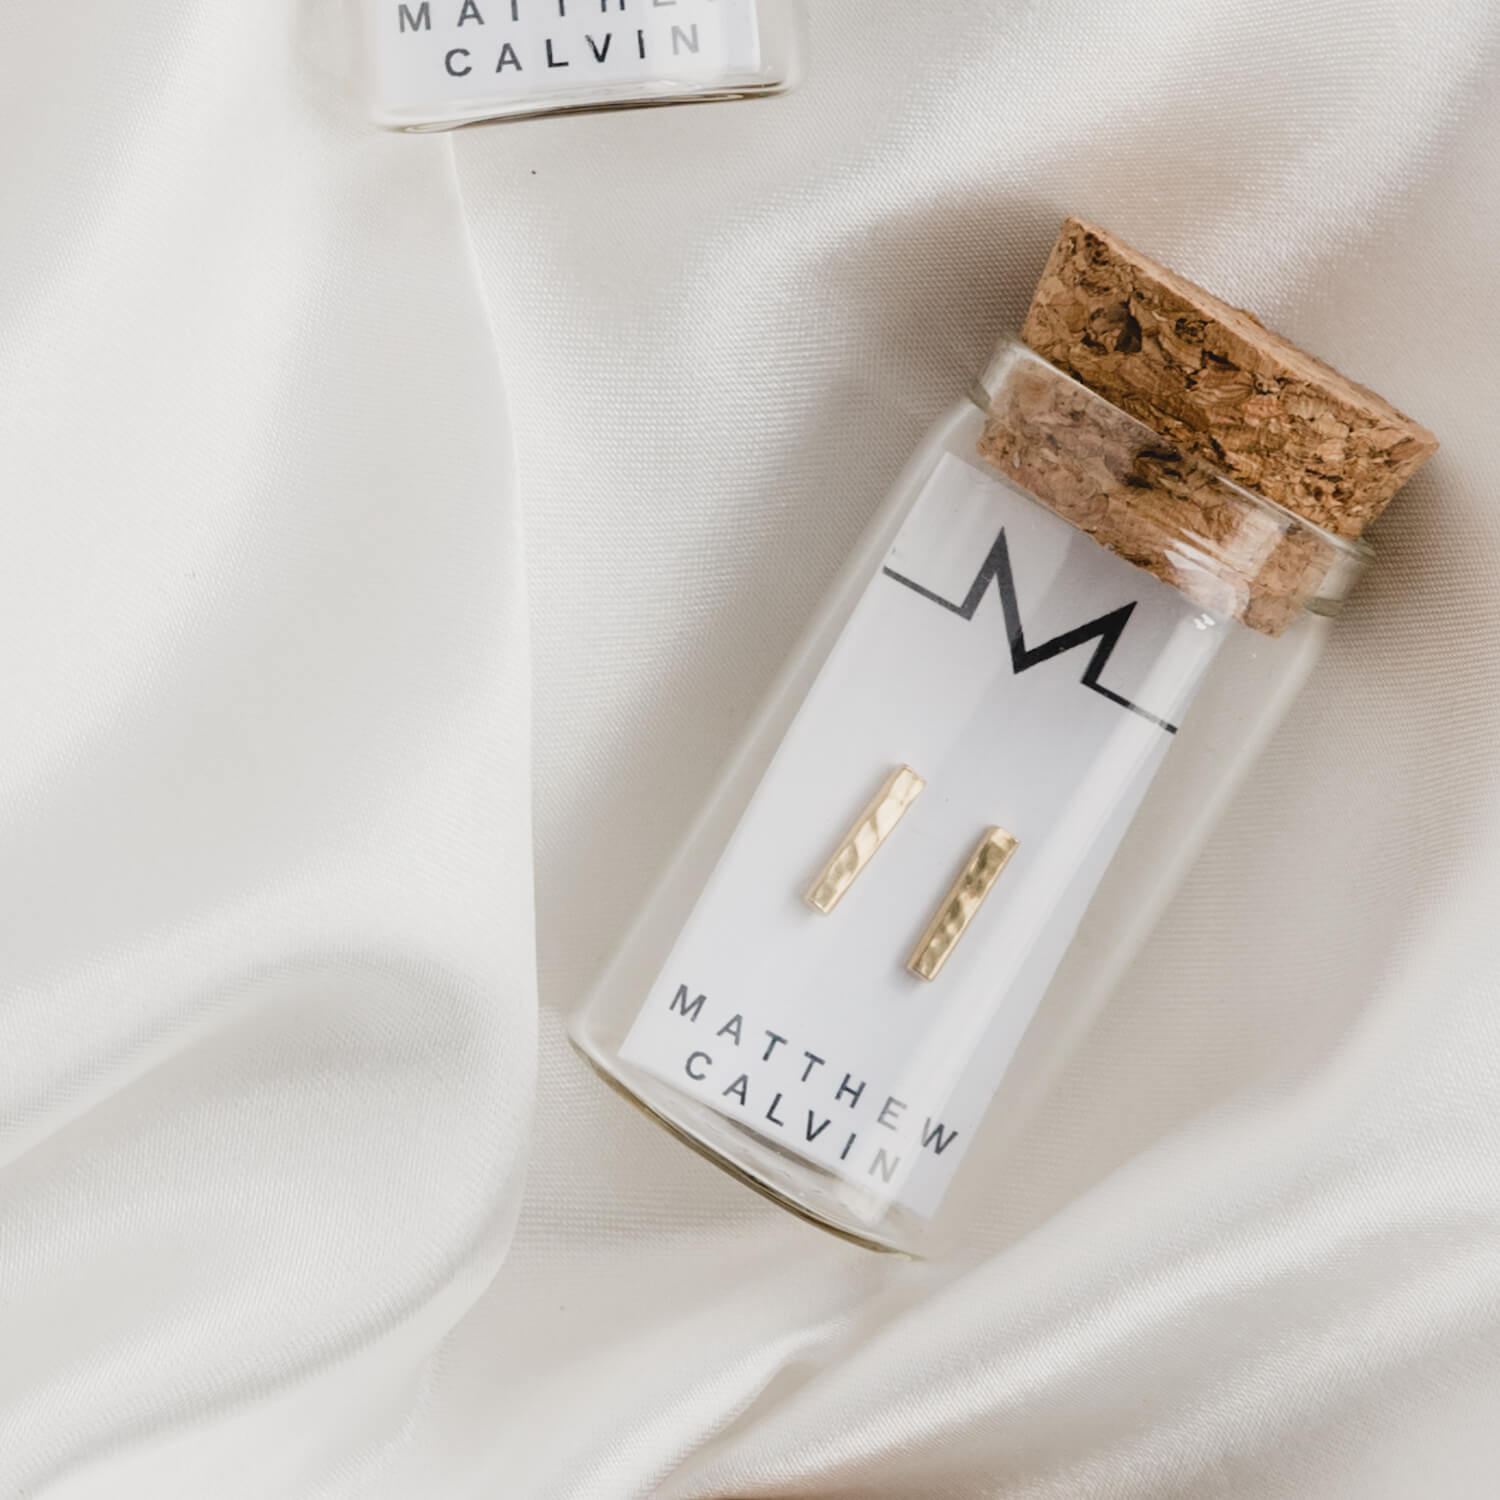 Small glass bottle with a cork lid, holding Textured Bar Earrings by Matthew Calvin in gold